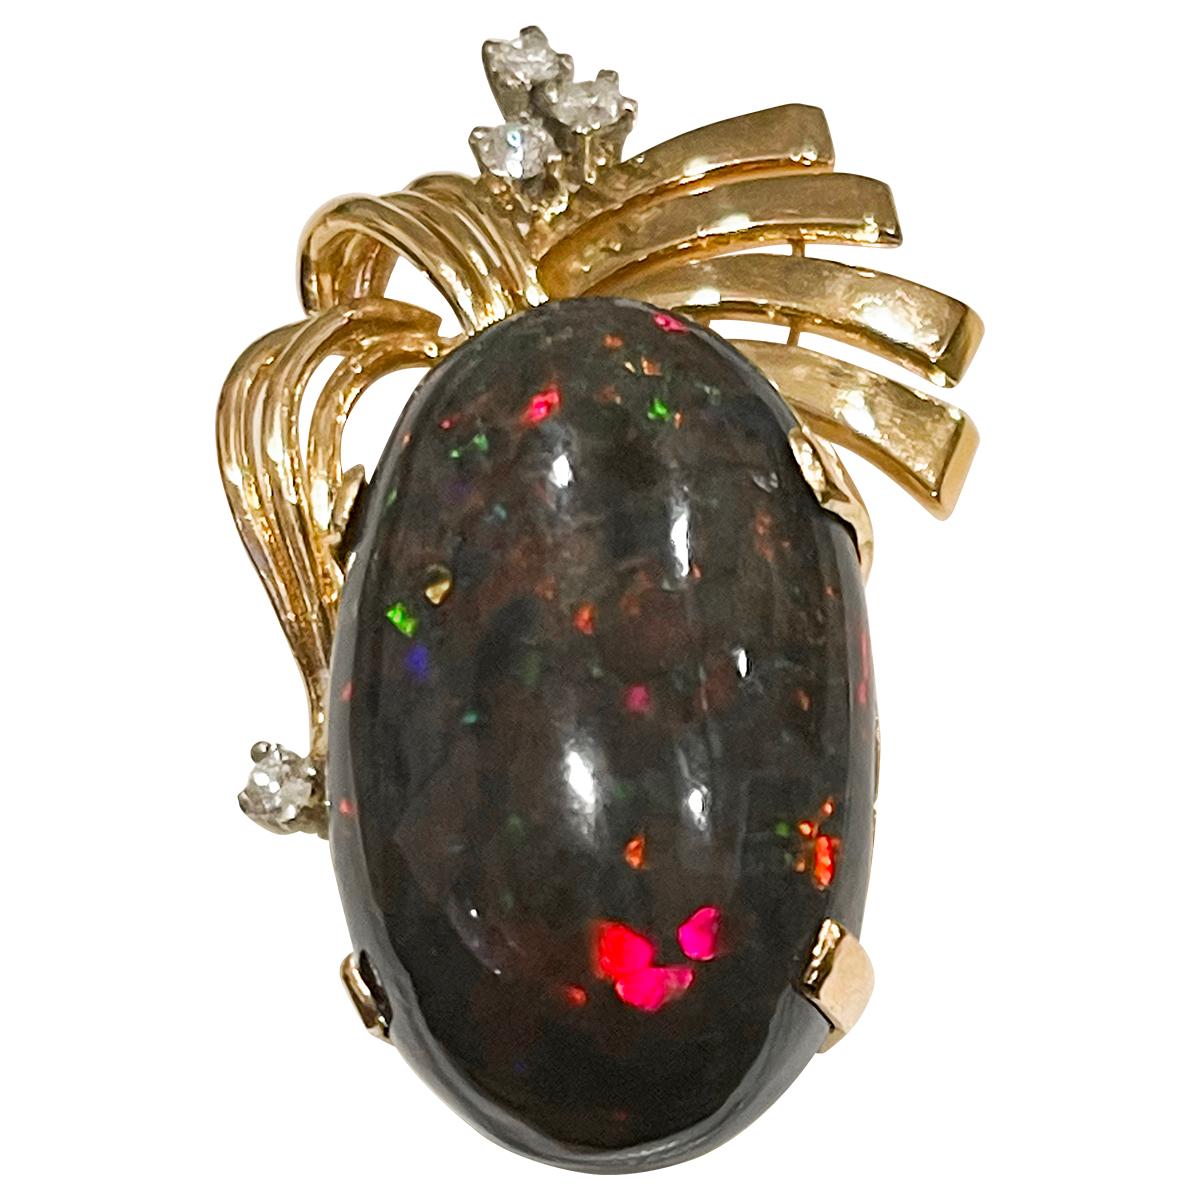 Approximately 30 Carat Oval Ethiopian Black Opal Pendant/Necklace 18 Karat + 18 Kt Gold Chain
This spectacular Pendant Necklace consisting of a single Oval Shape Ethiopian Black  Opal Approximately 30 Carat. 
Black opals are very unique and rare